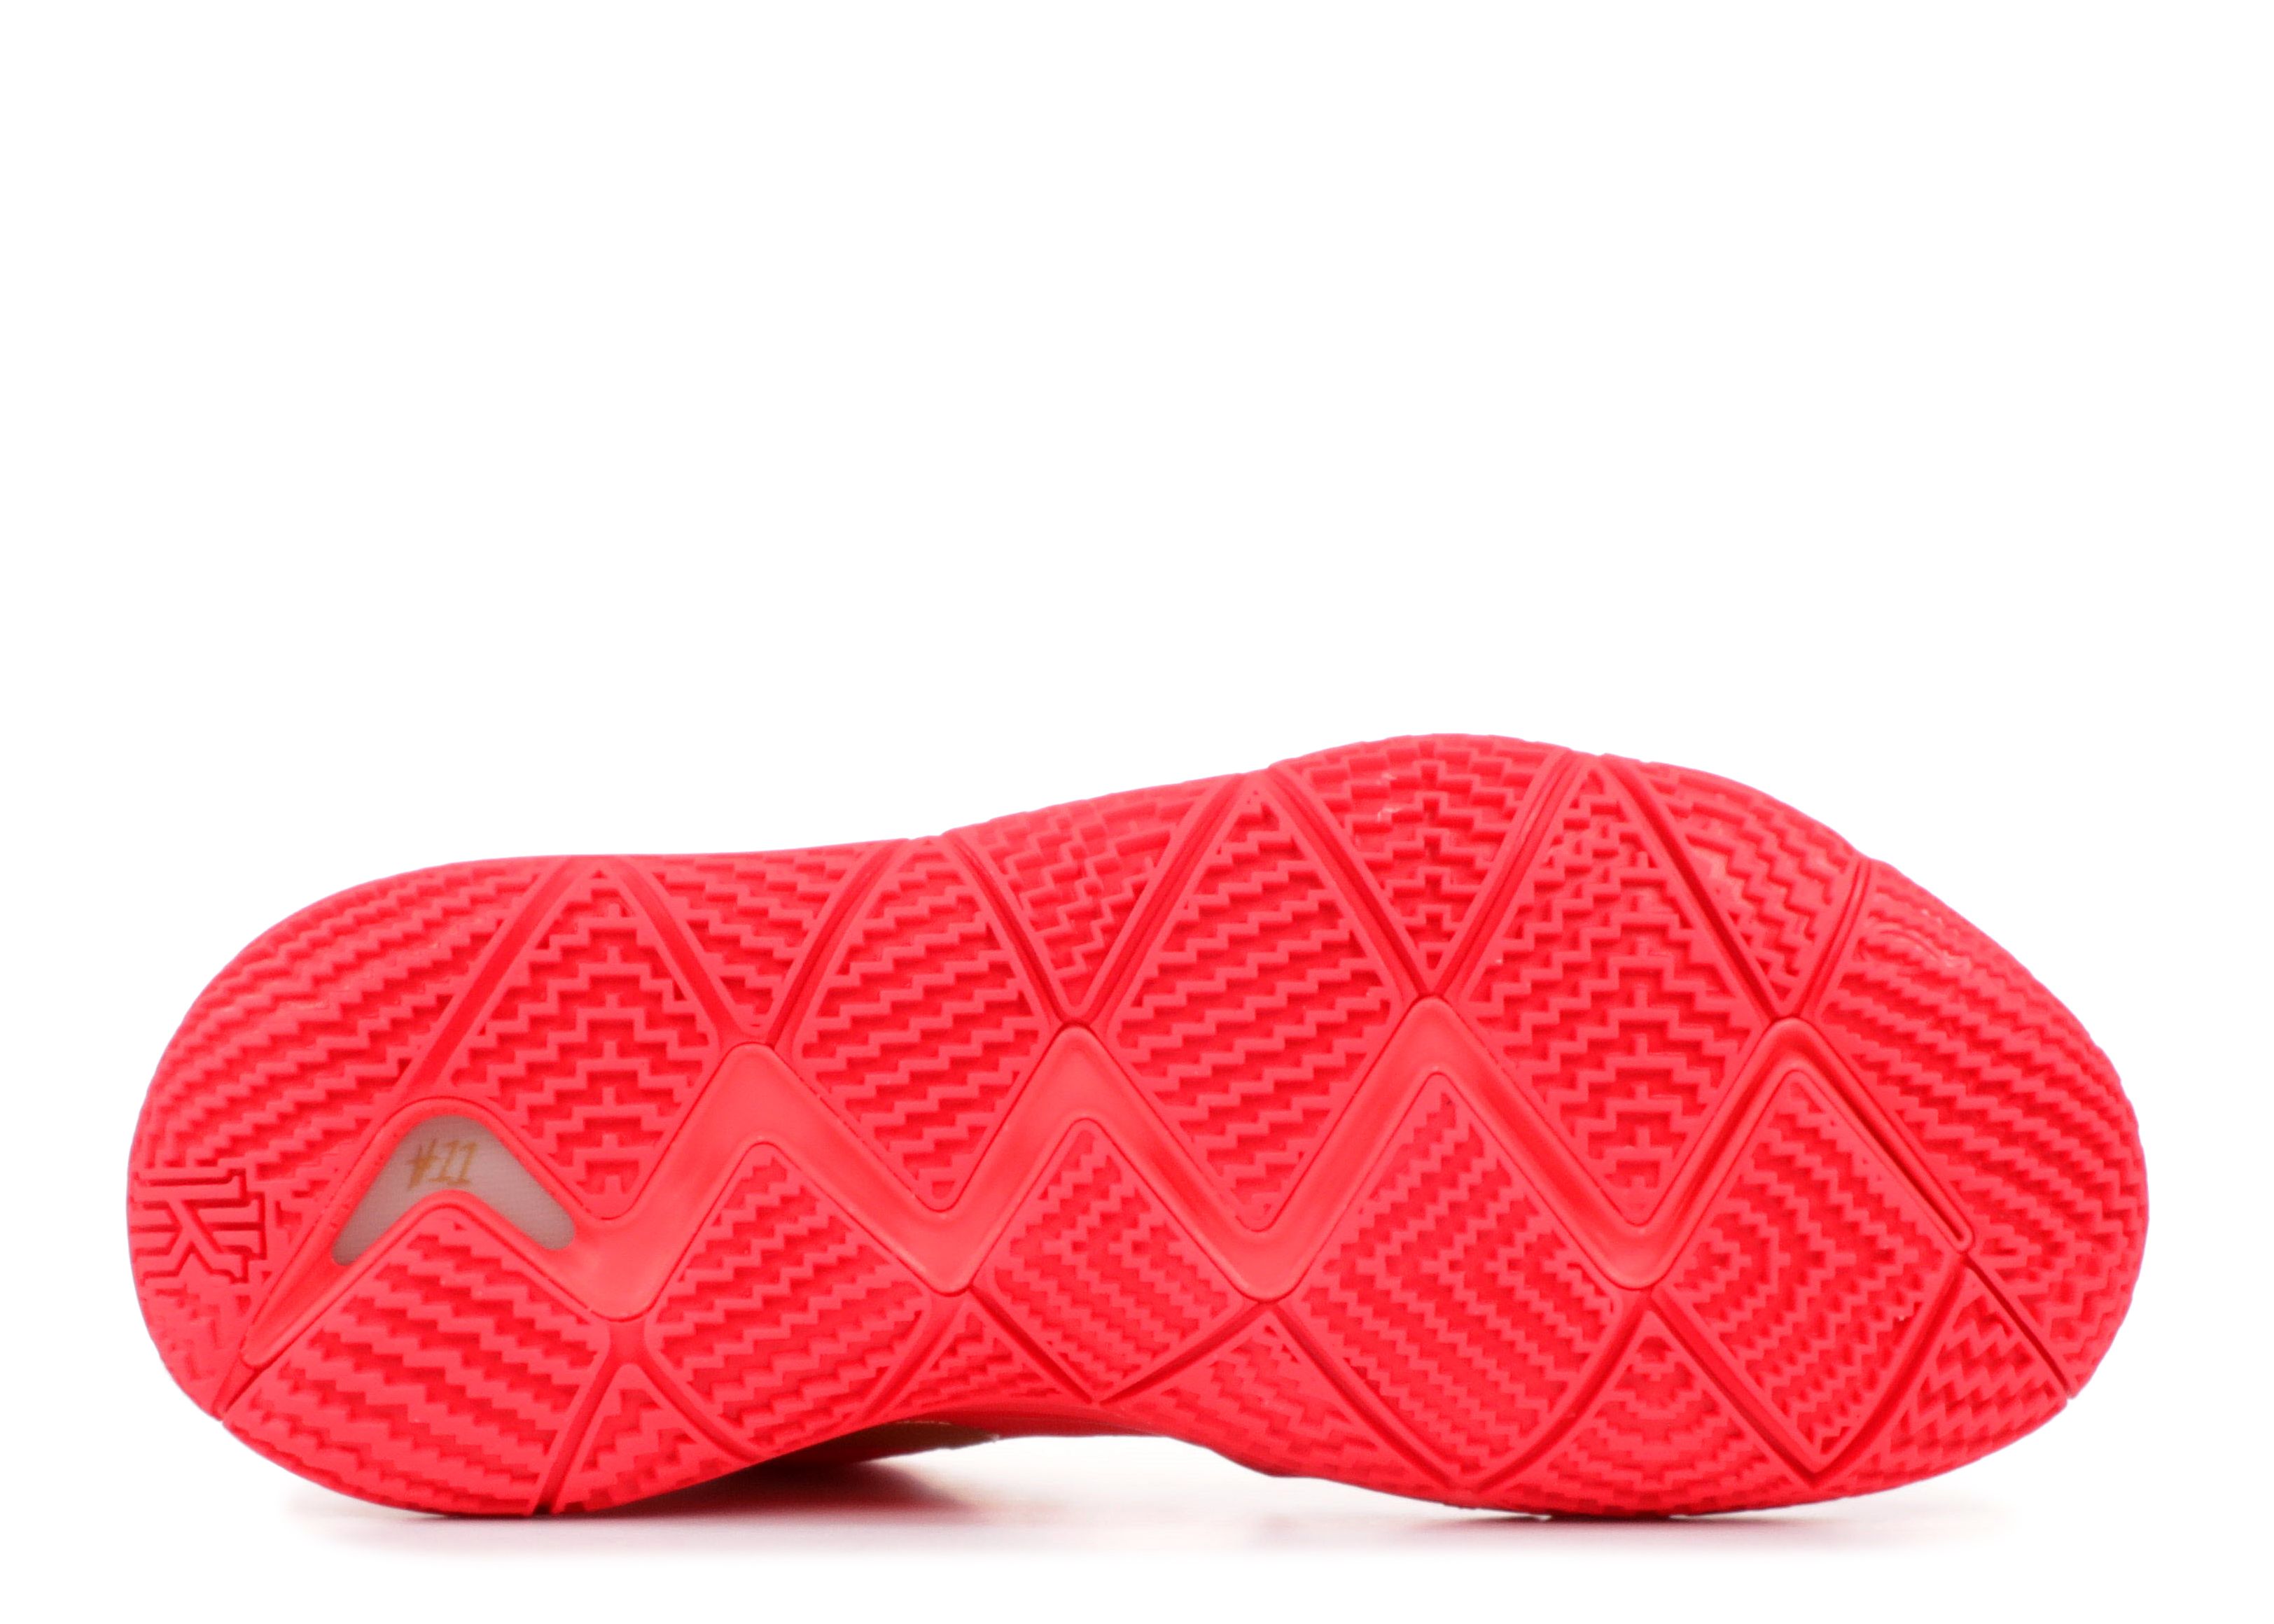 kyrie 4 womens red